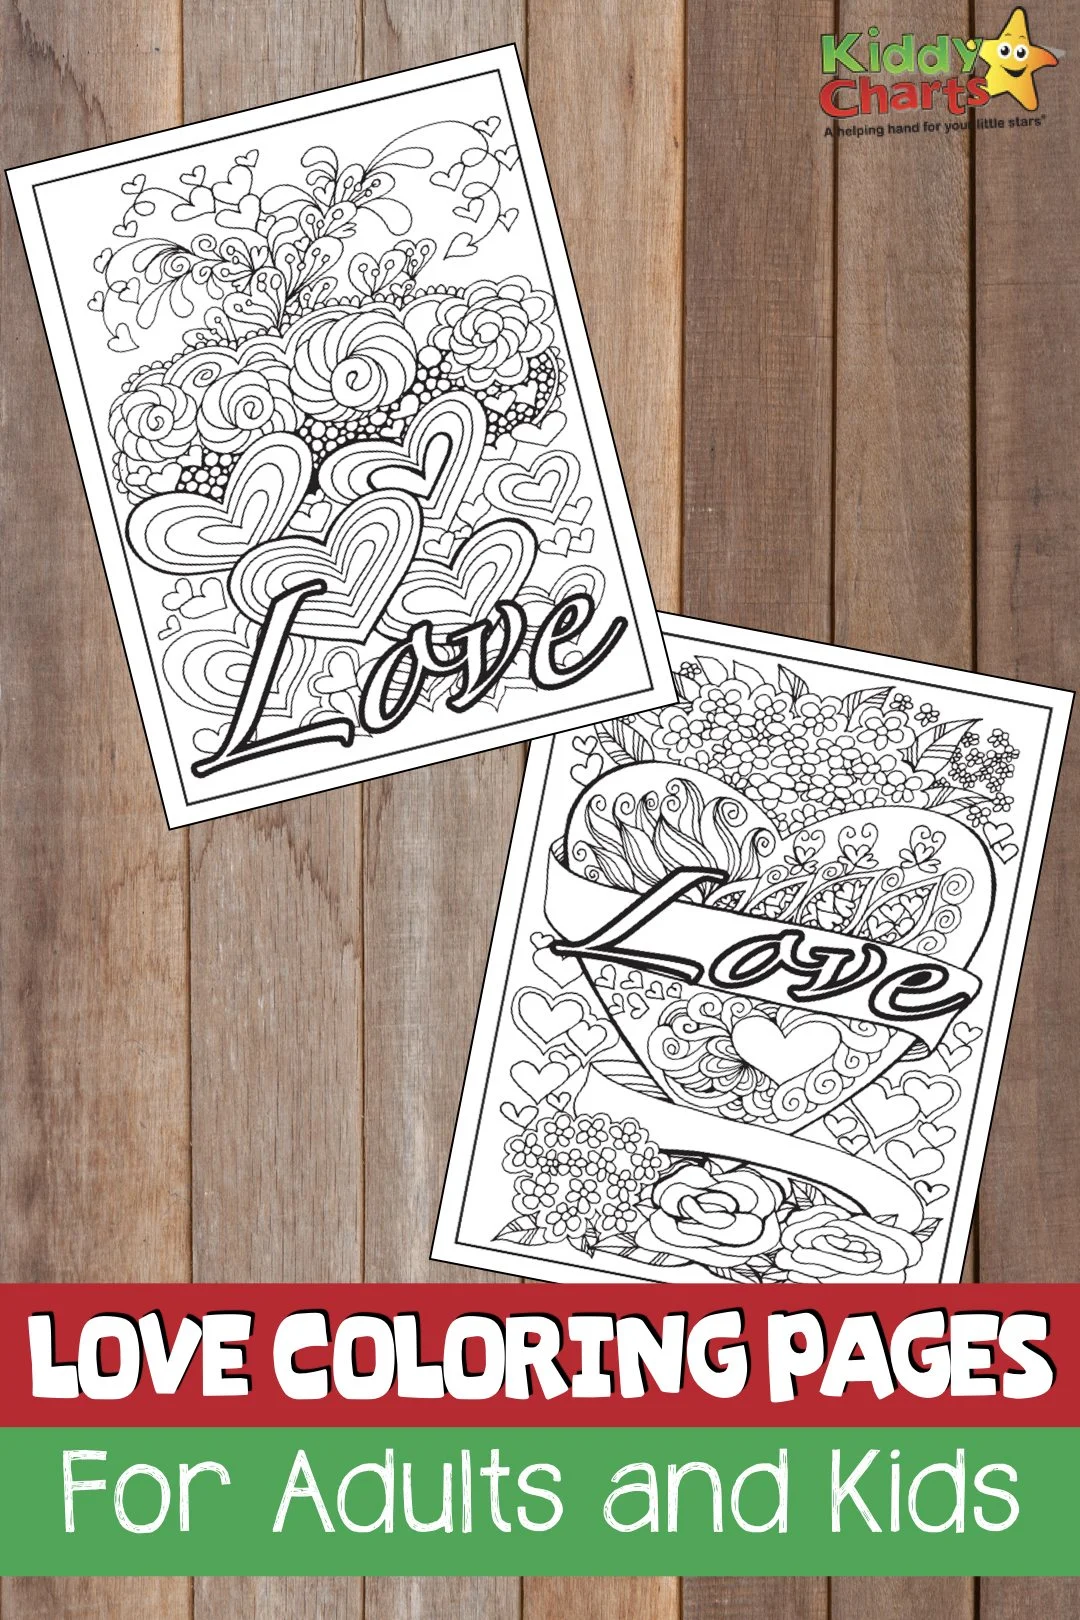 Love coloring pages for adults and kids